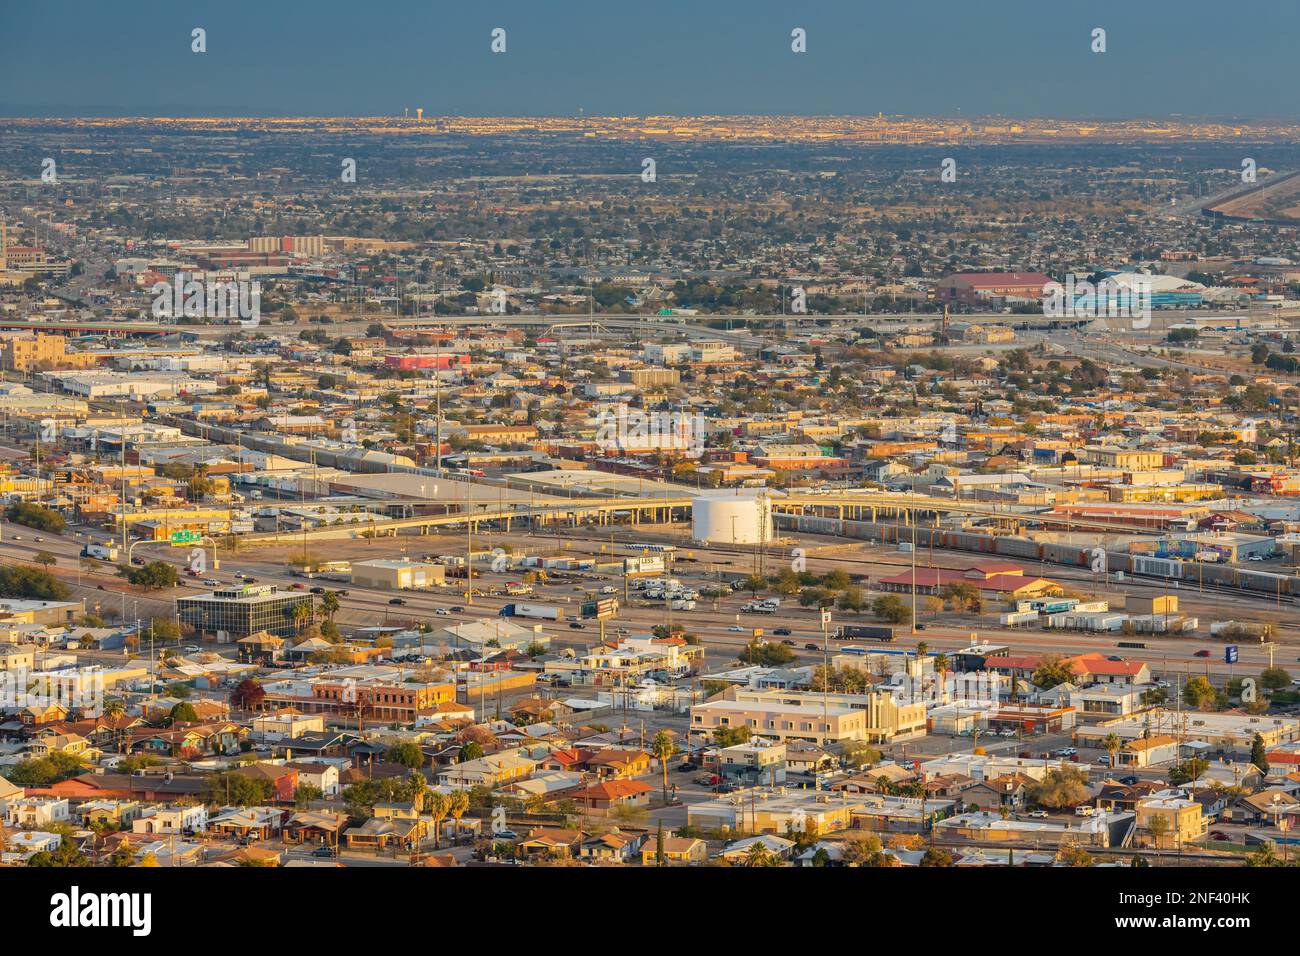 High angle view of the beautiful El Paso city and Ciudad Juarez of Mexico from the overlook at Texas Stock Photo